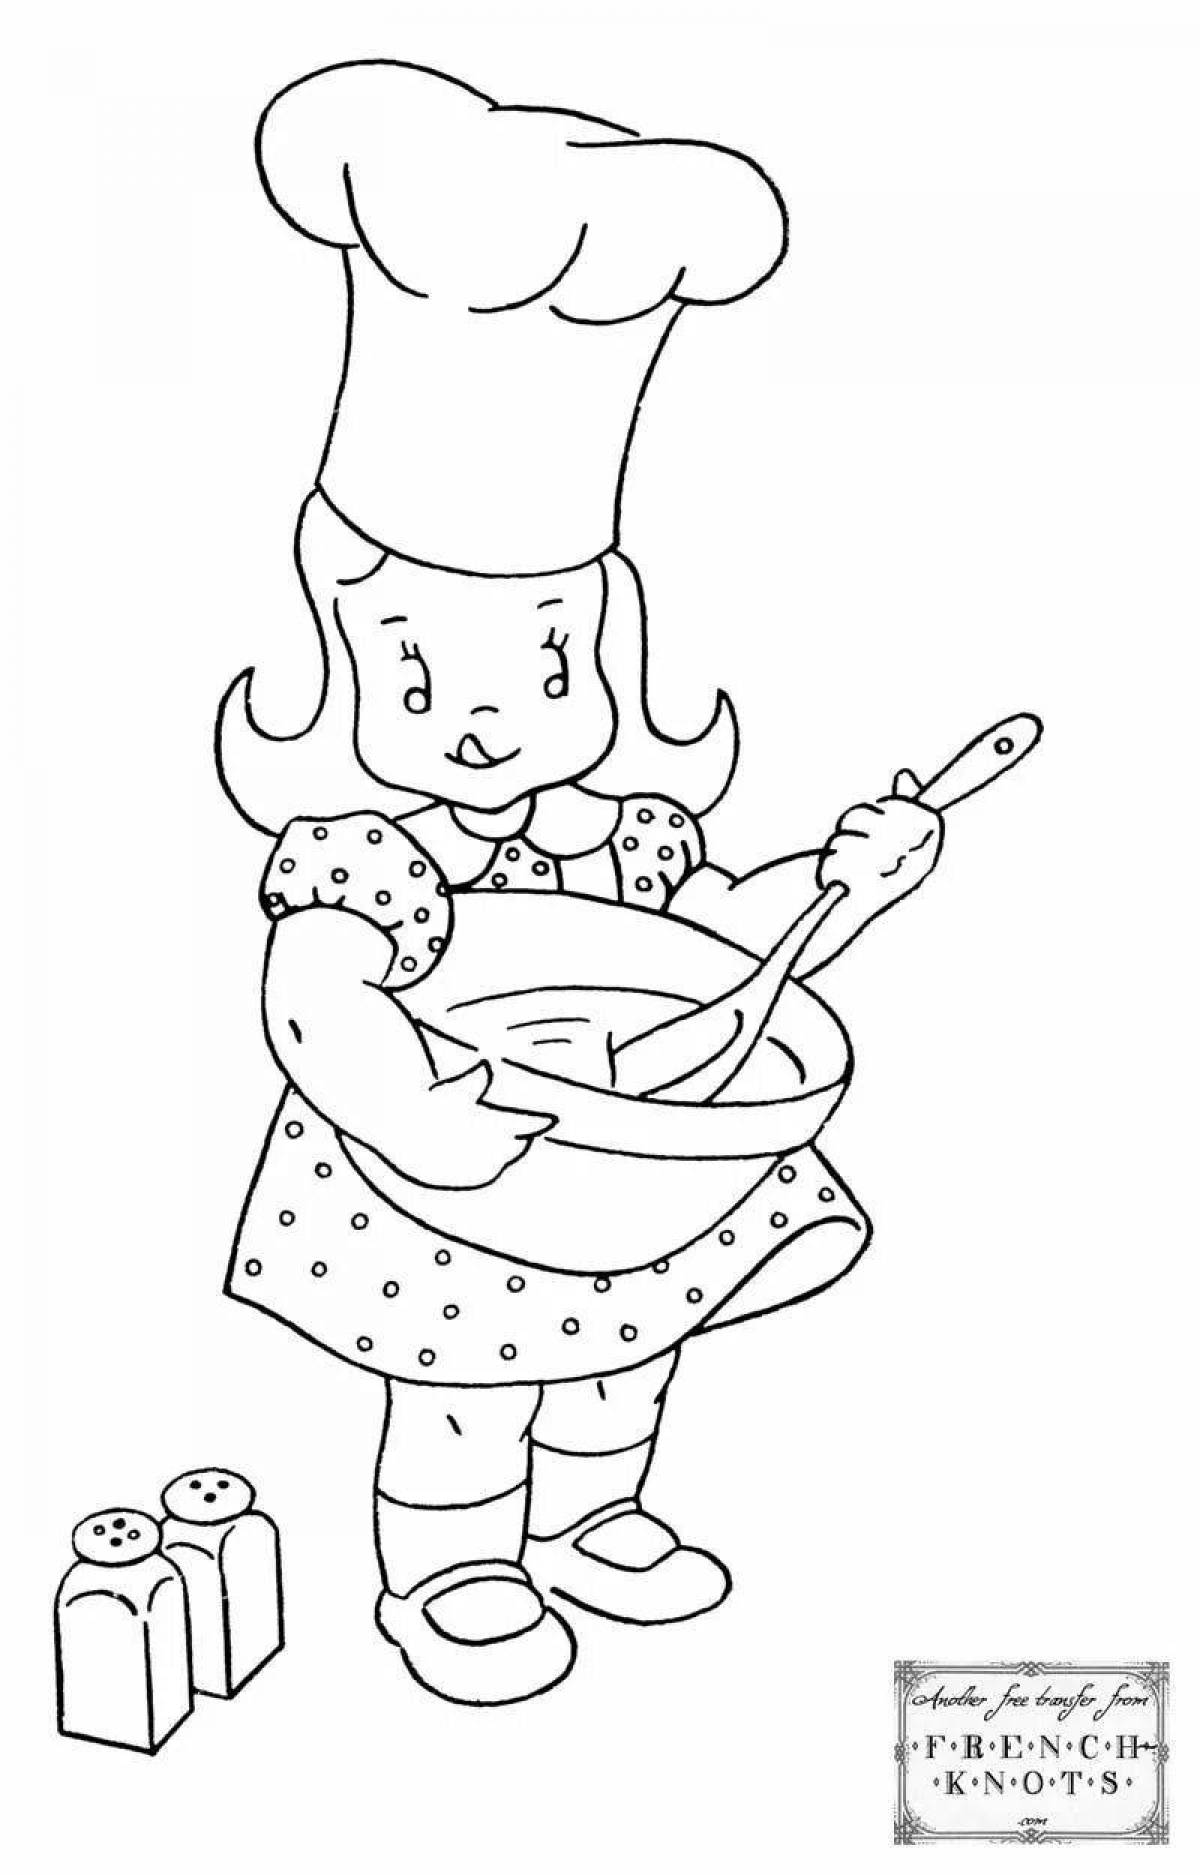 Coloring page energetic cook